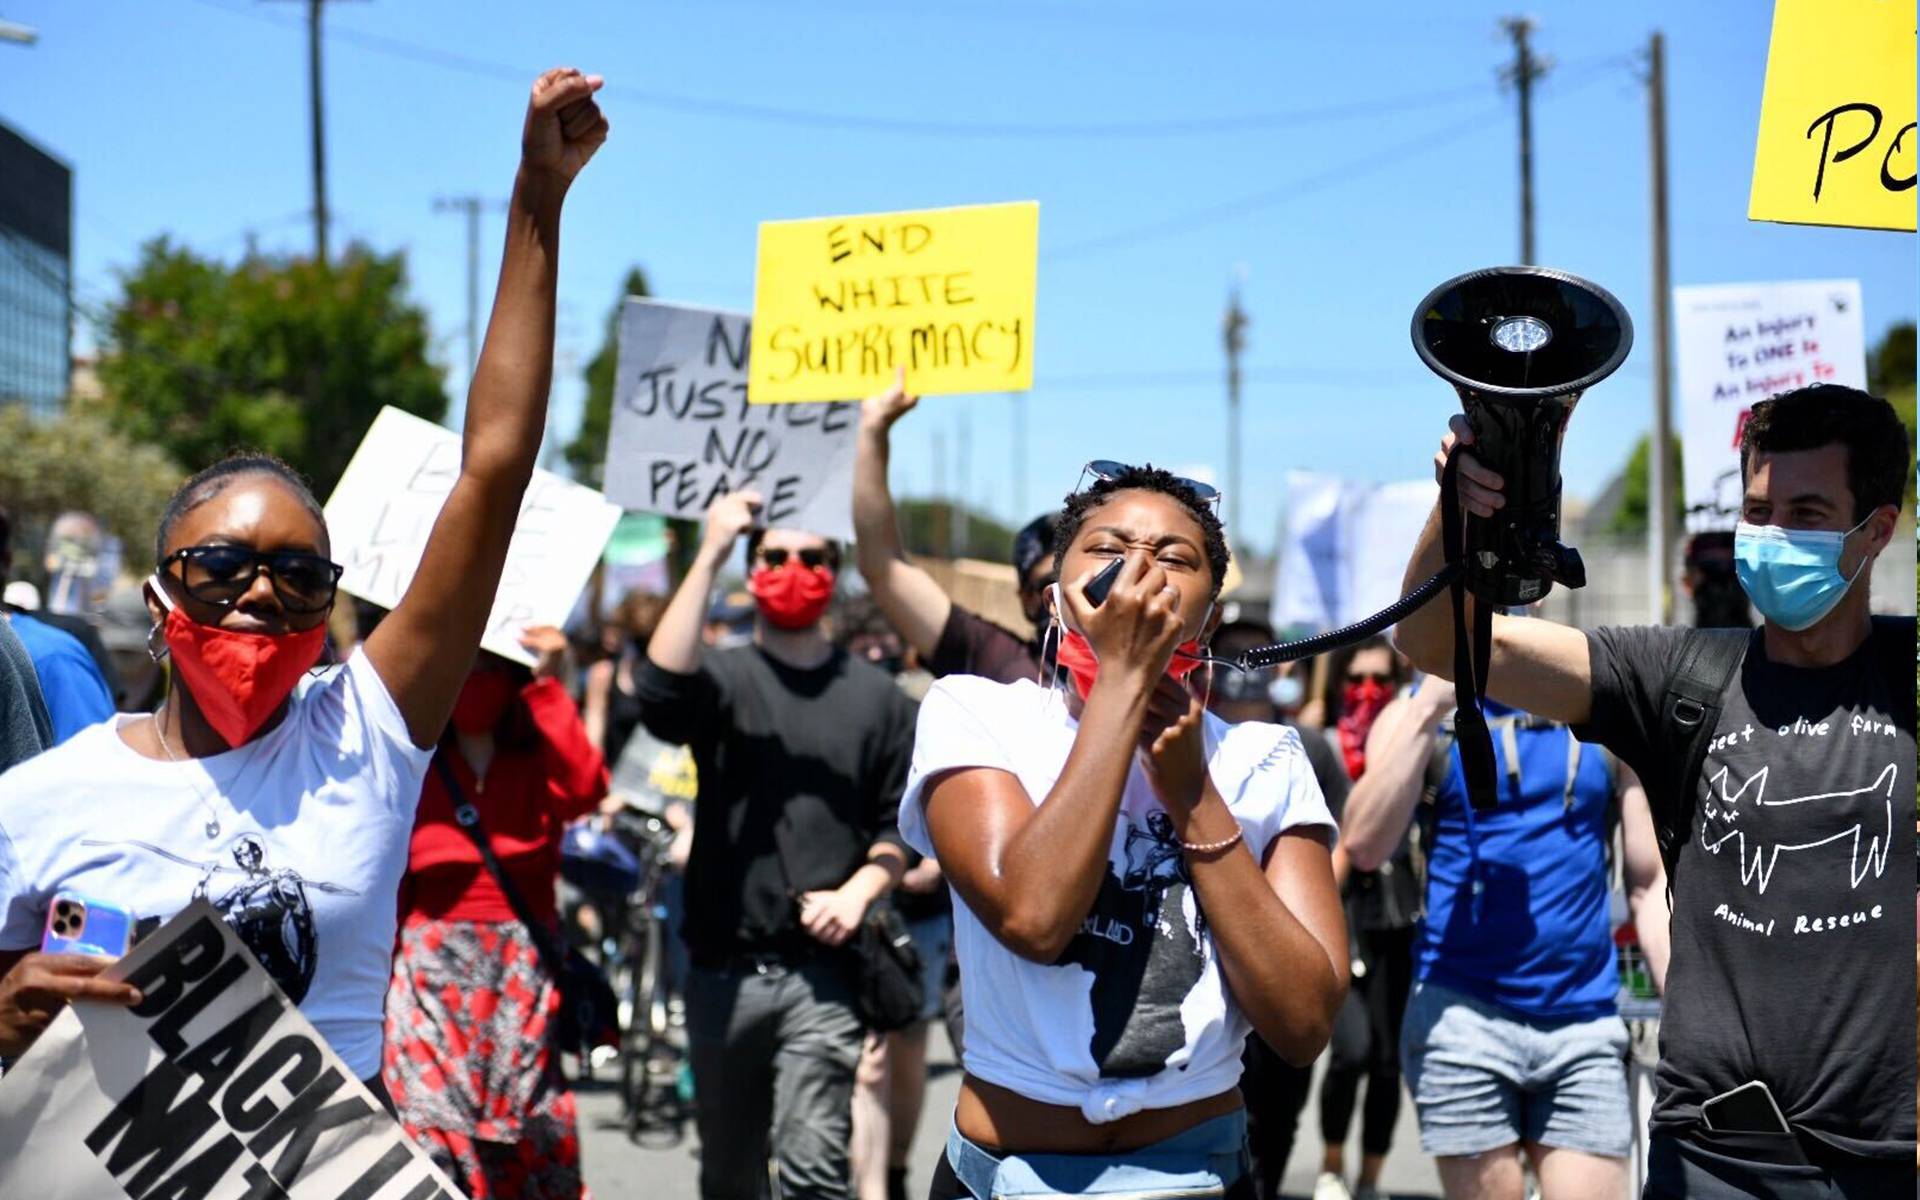 Adrianna Mitchell (center) and Akilah Walker march from the Port of Oakland to Downtown during a Juneteenth rally on June 19, 2020. Beth LaBerge/KQED